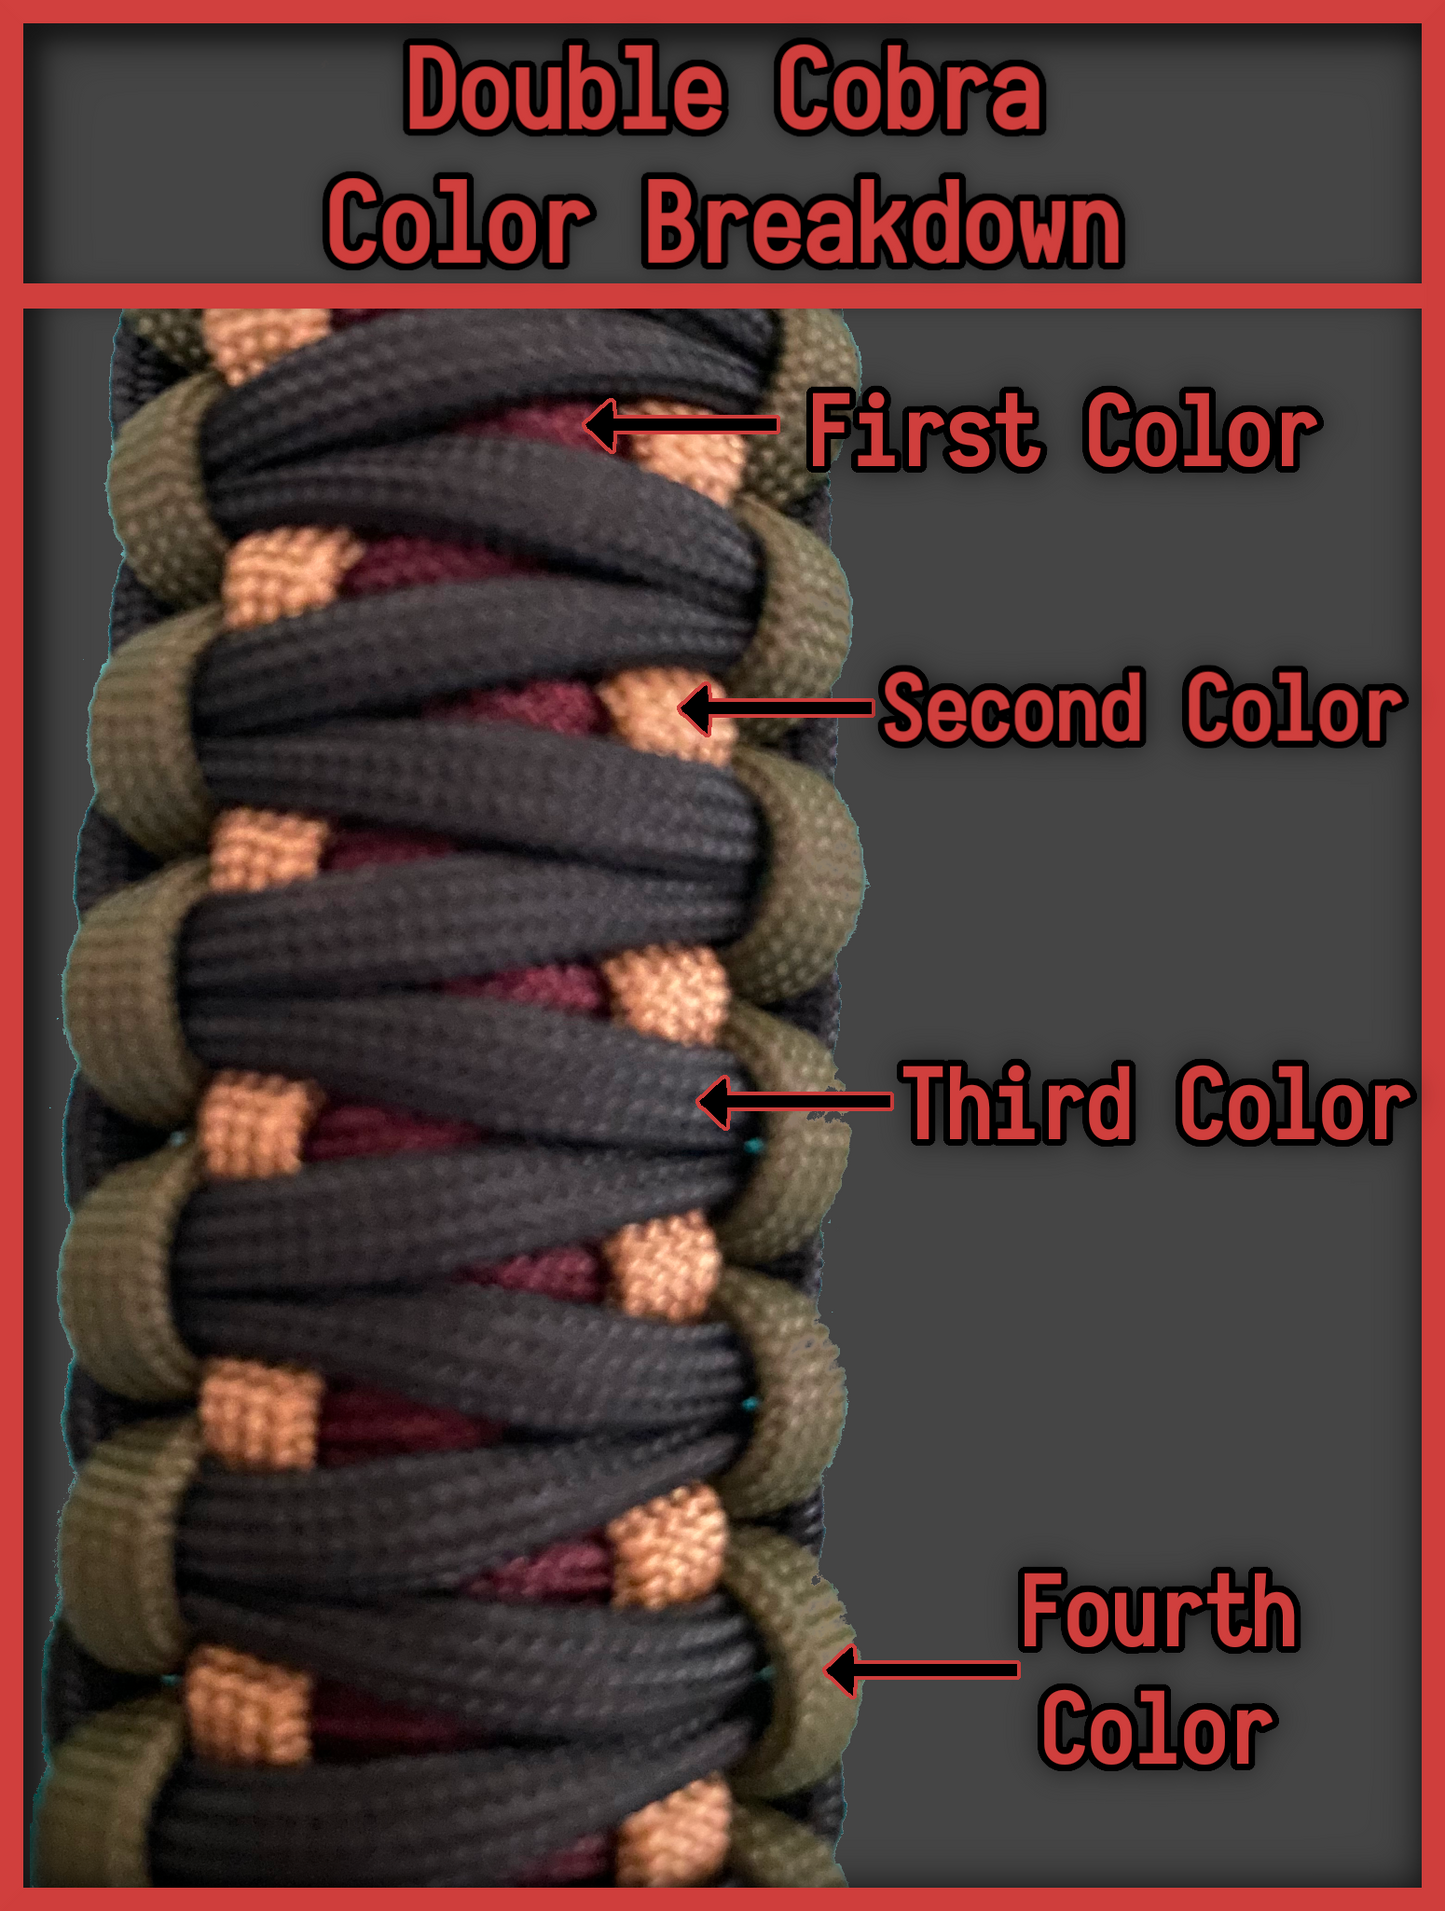 Custom Paracord Cobra Keychain, Choose your Weave Subtypes, Colors, Hardware, and Size